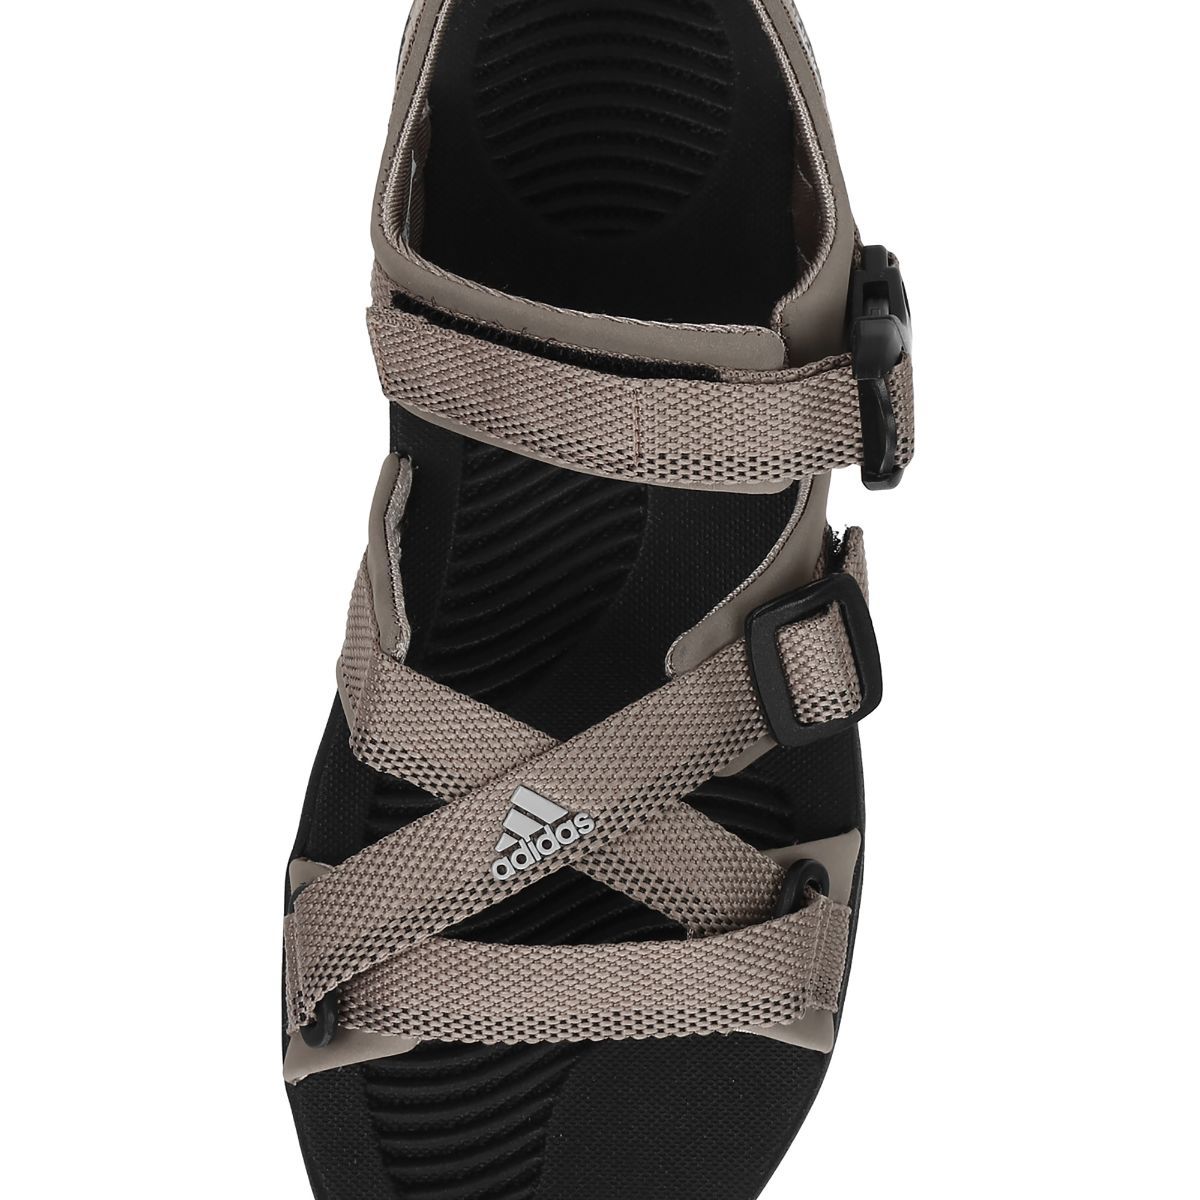 Buy Adidas Men's GLADI M Sandal Online at Low Prices in India -  Paytmmall.com